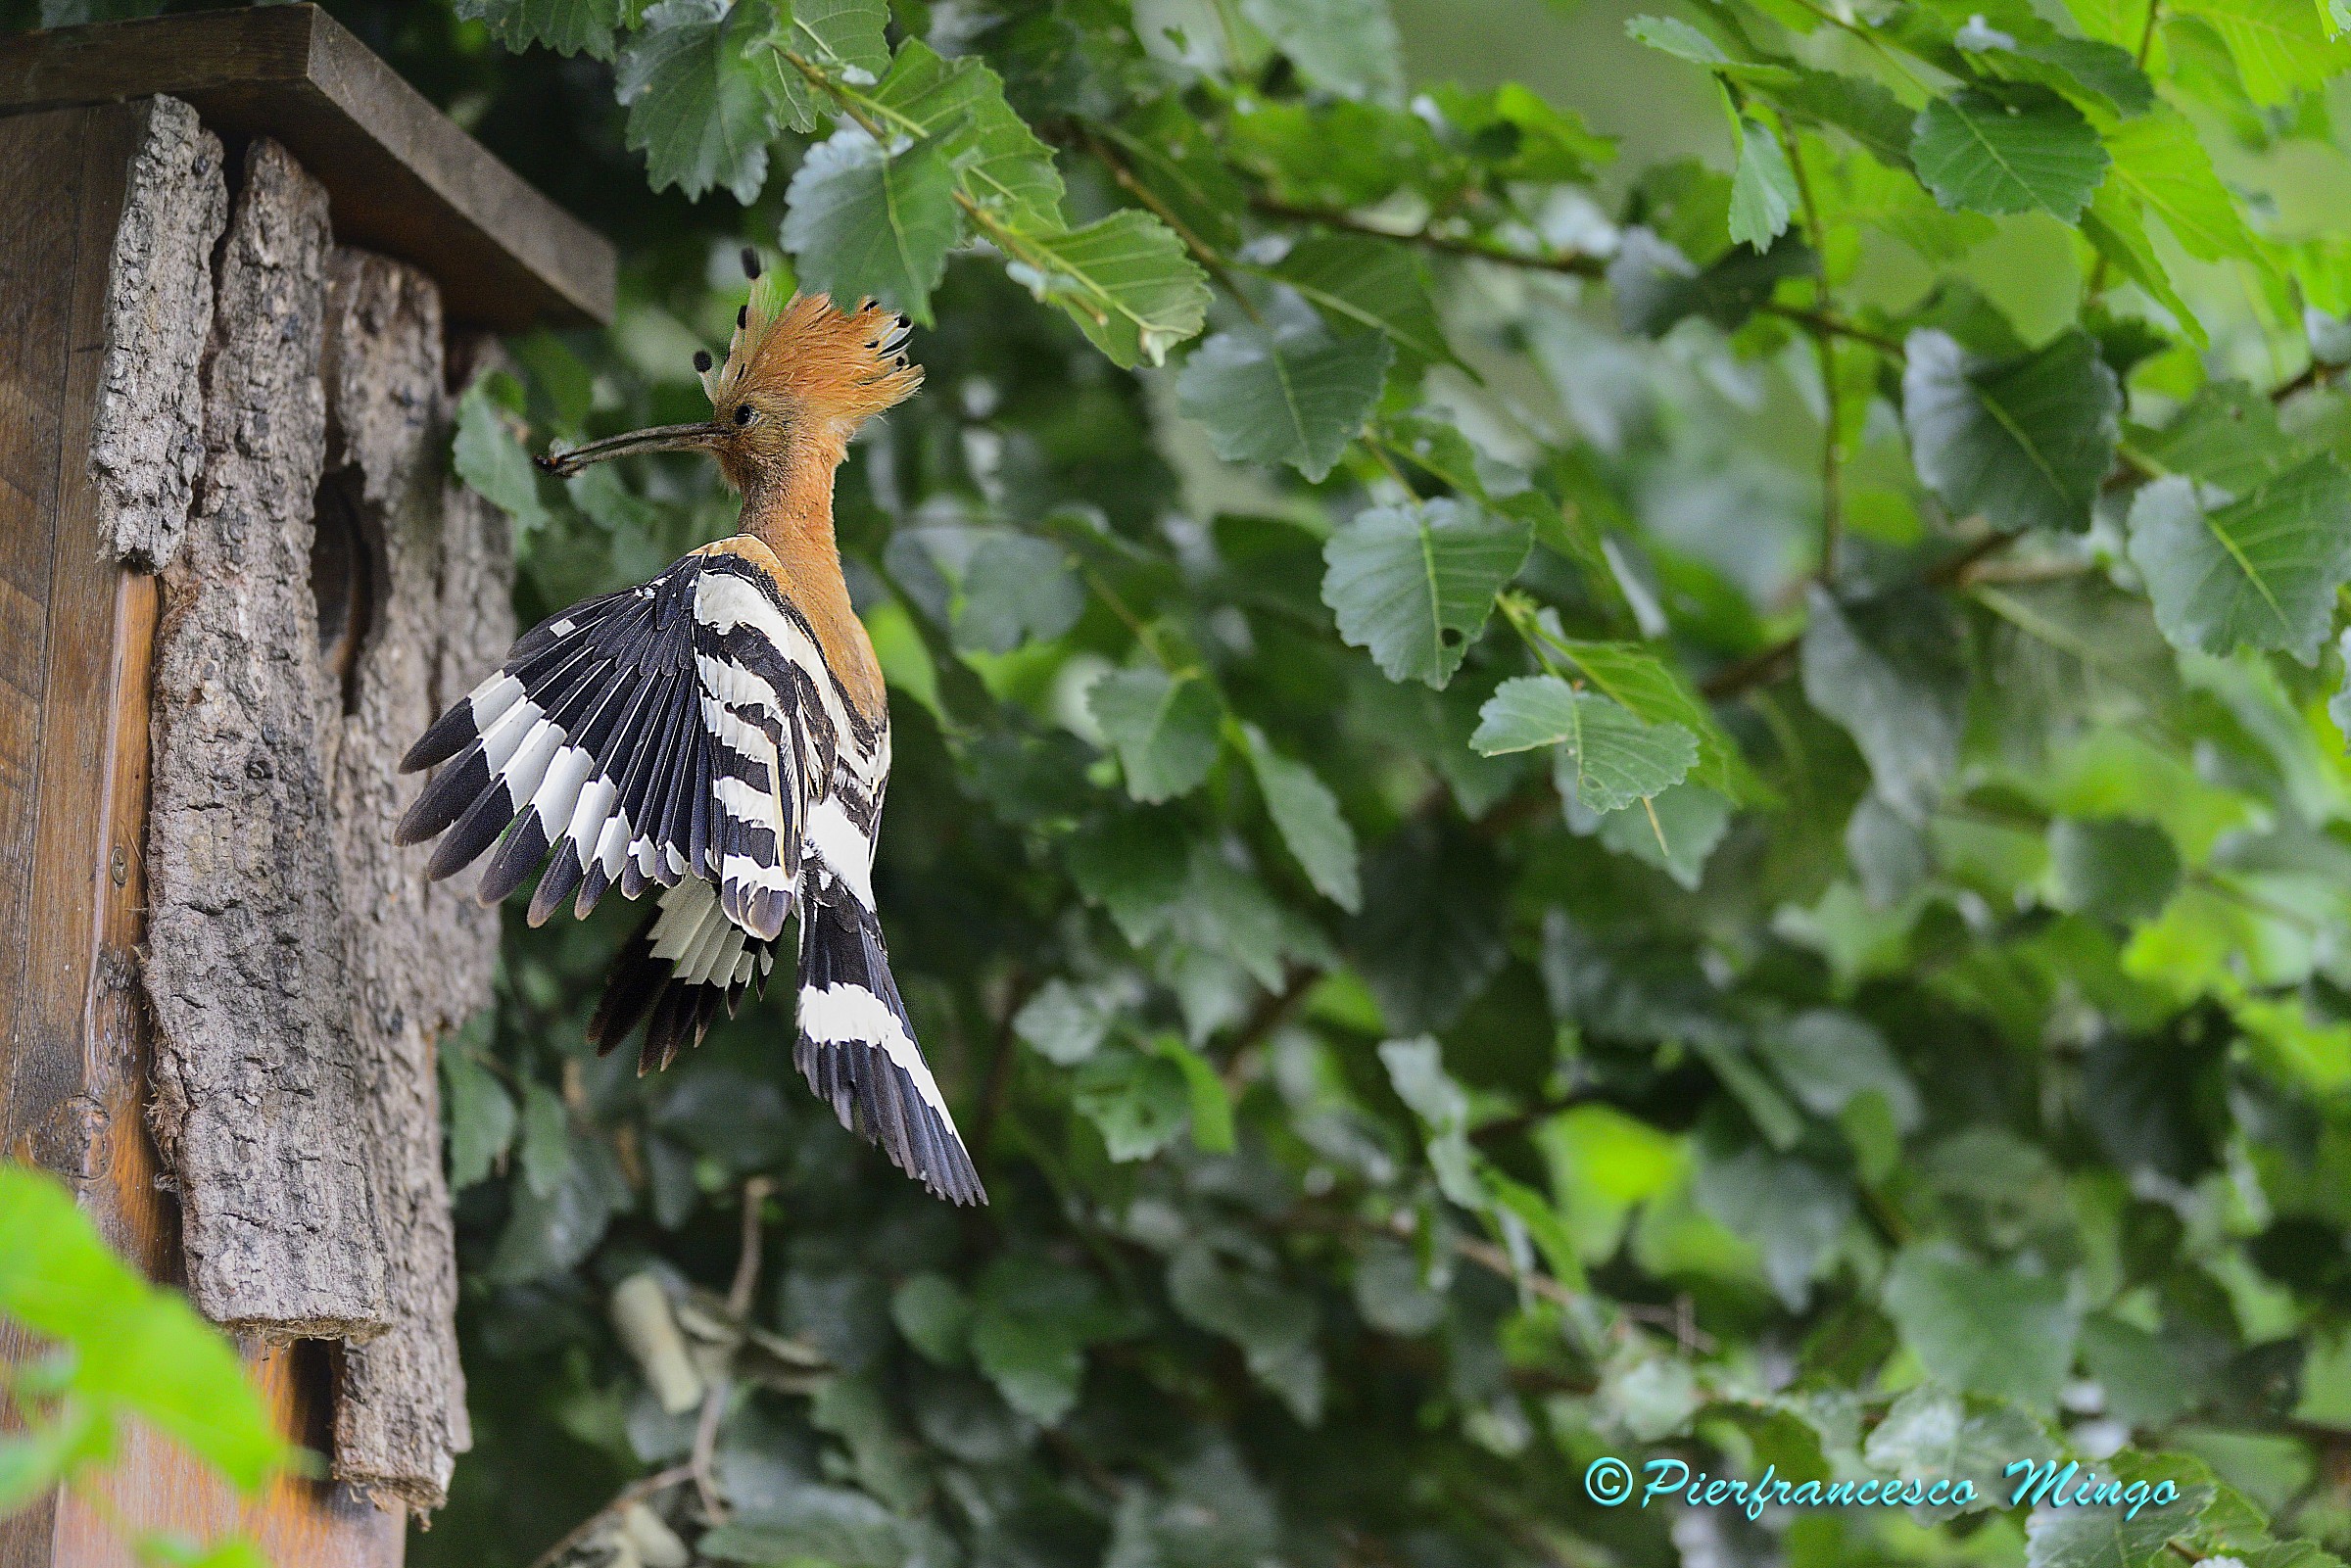 an artificial nest for the hoopoe...